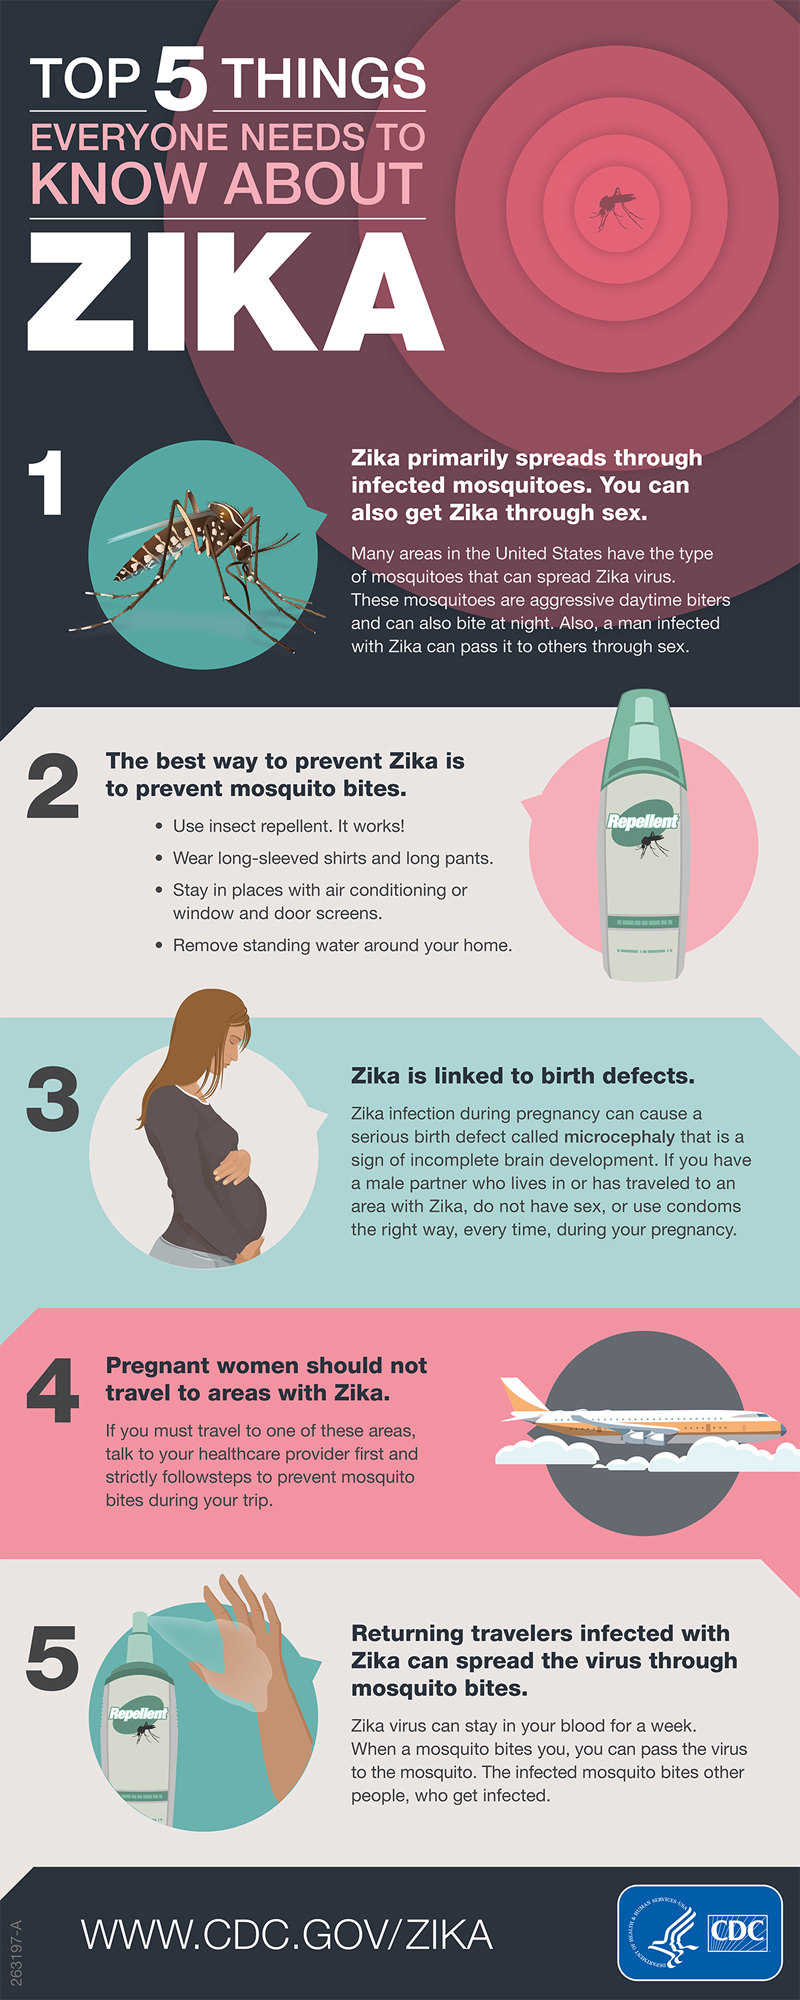 This Zika graphic was produced by the Centers for Disease Control and Prevention. Click to enlarge. (CNS graphic/Centers for Disease Control and Prevention)